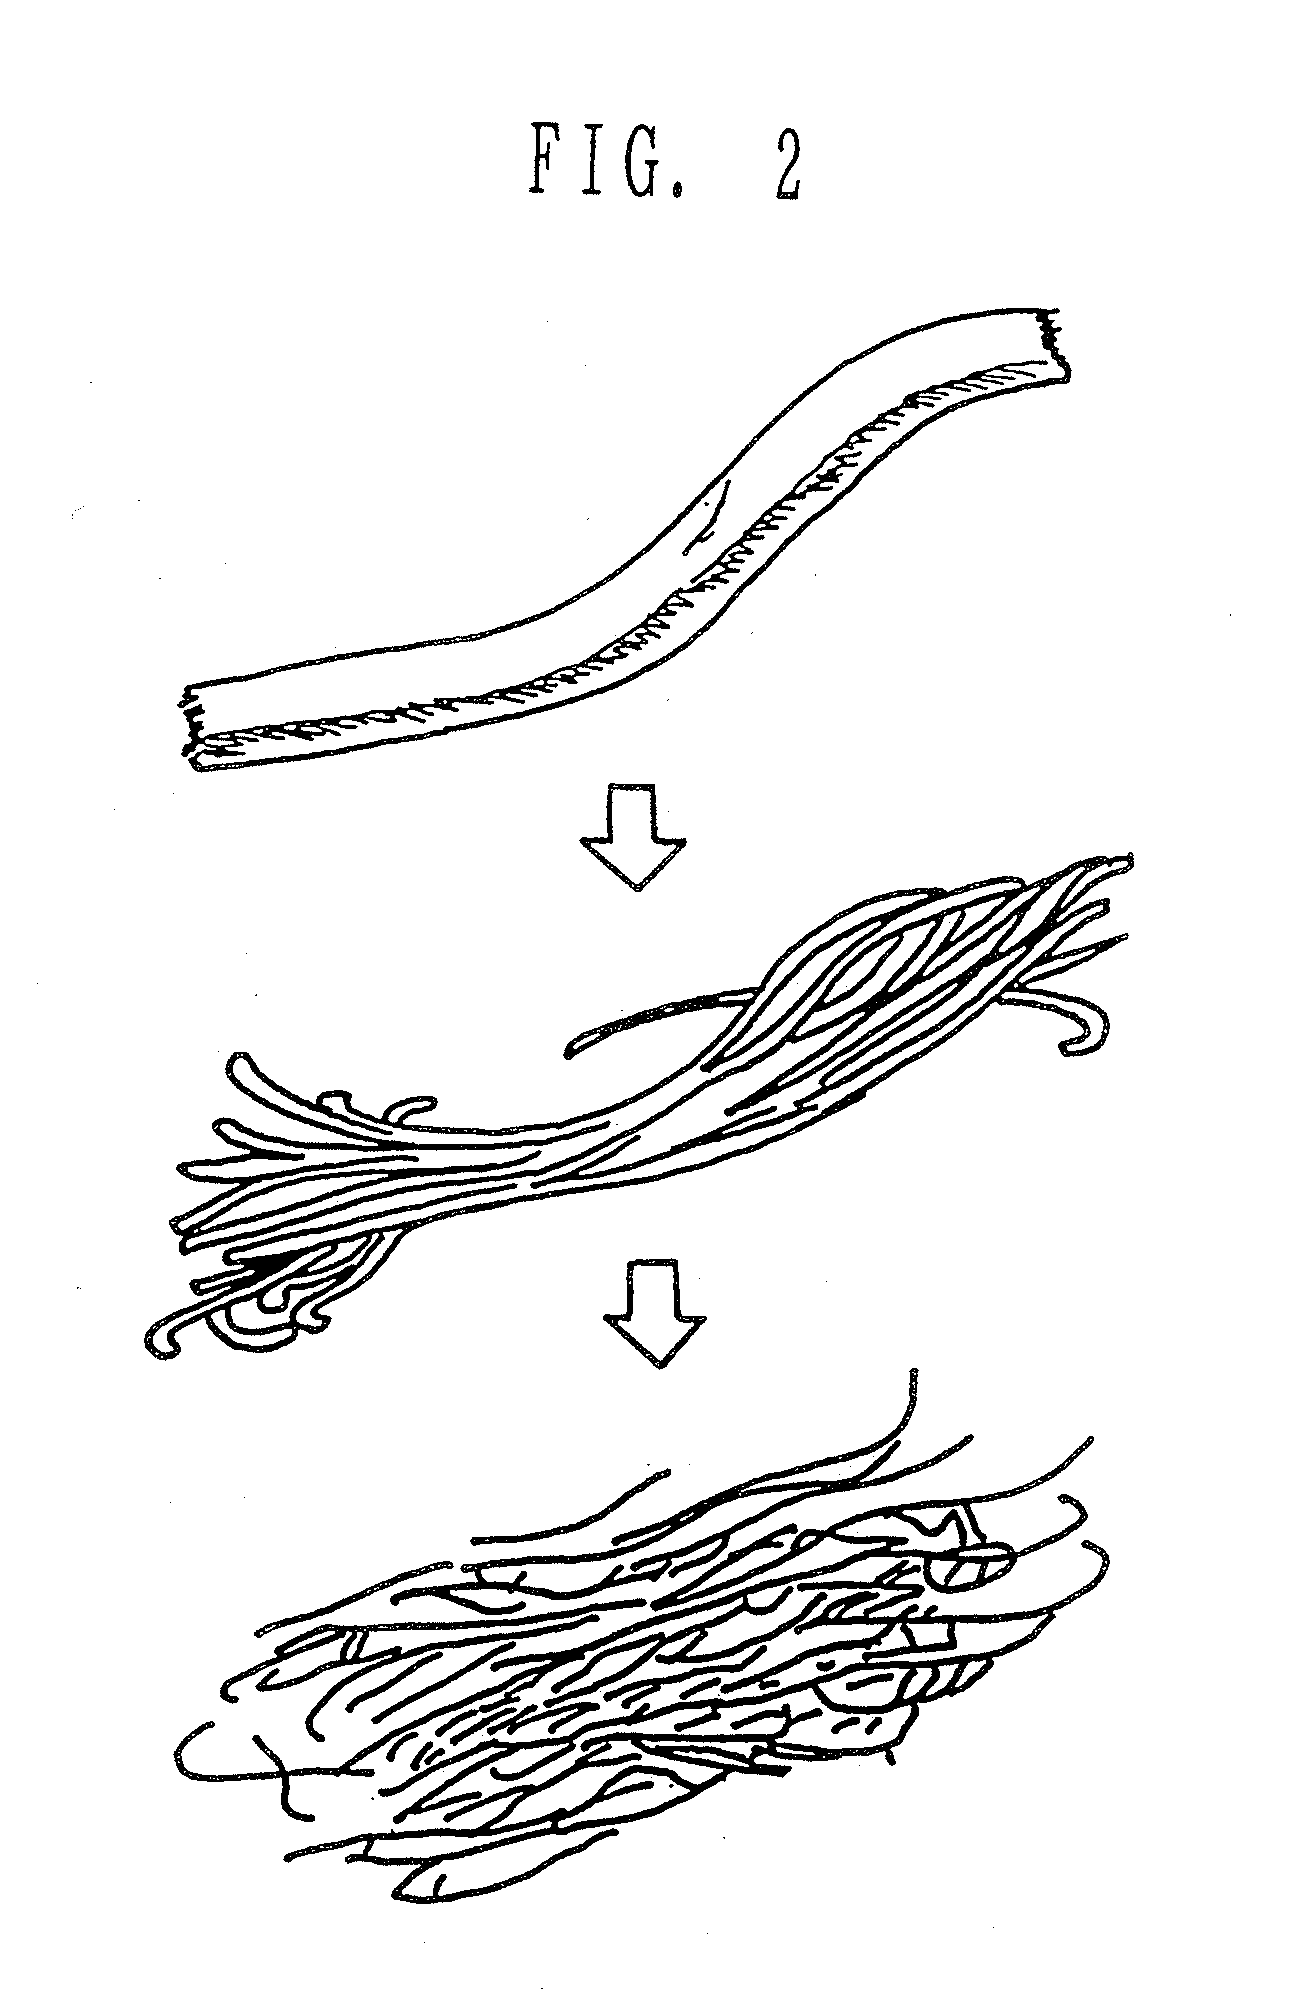 Highly absorbent composite and method of making the same